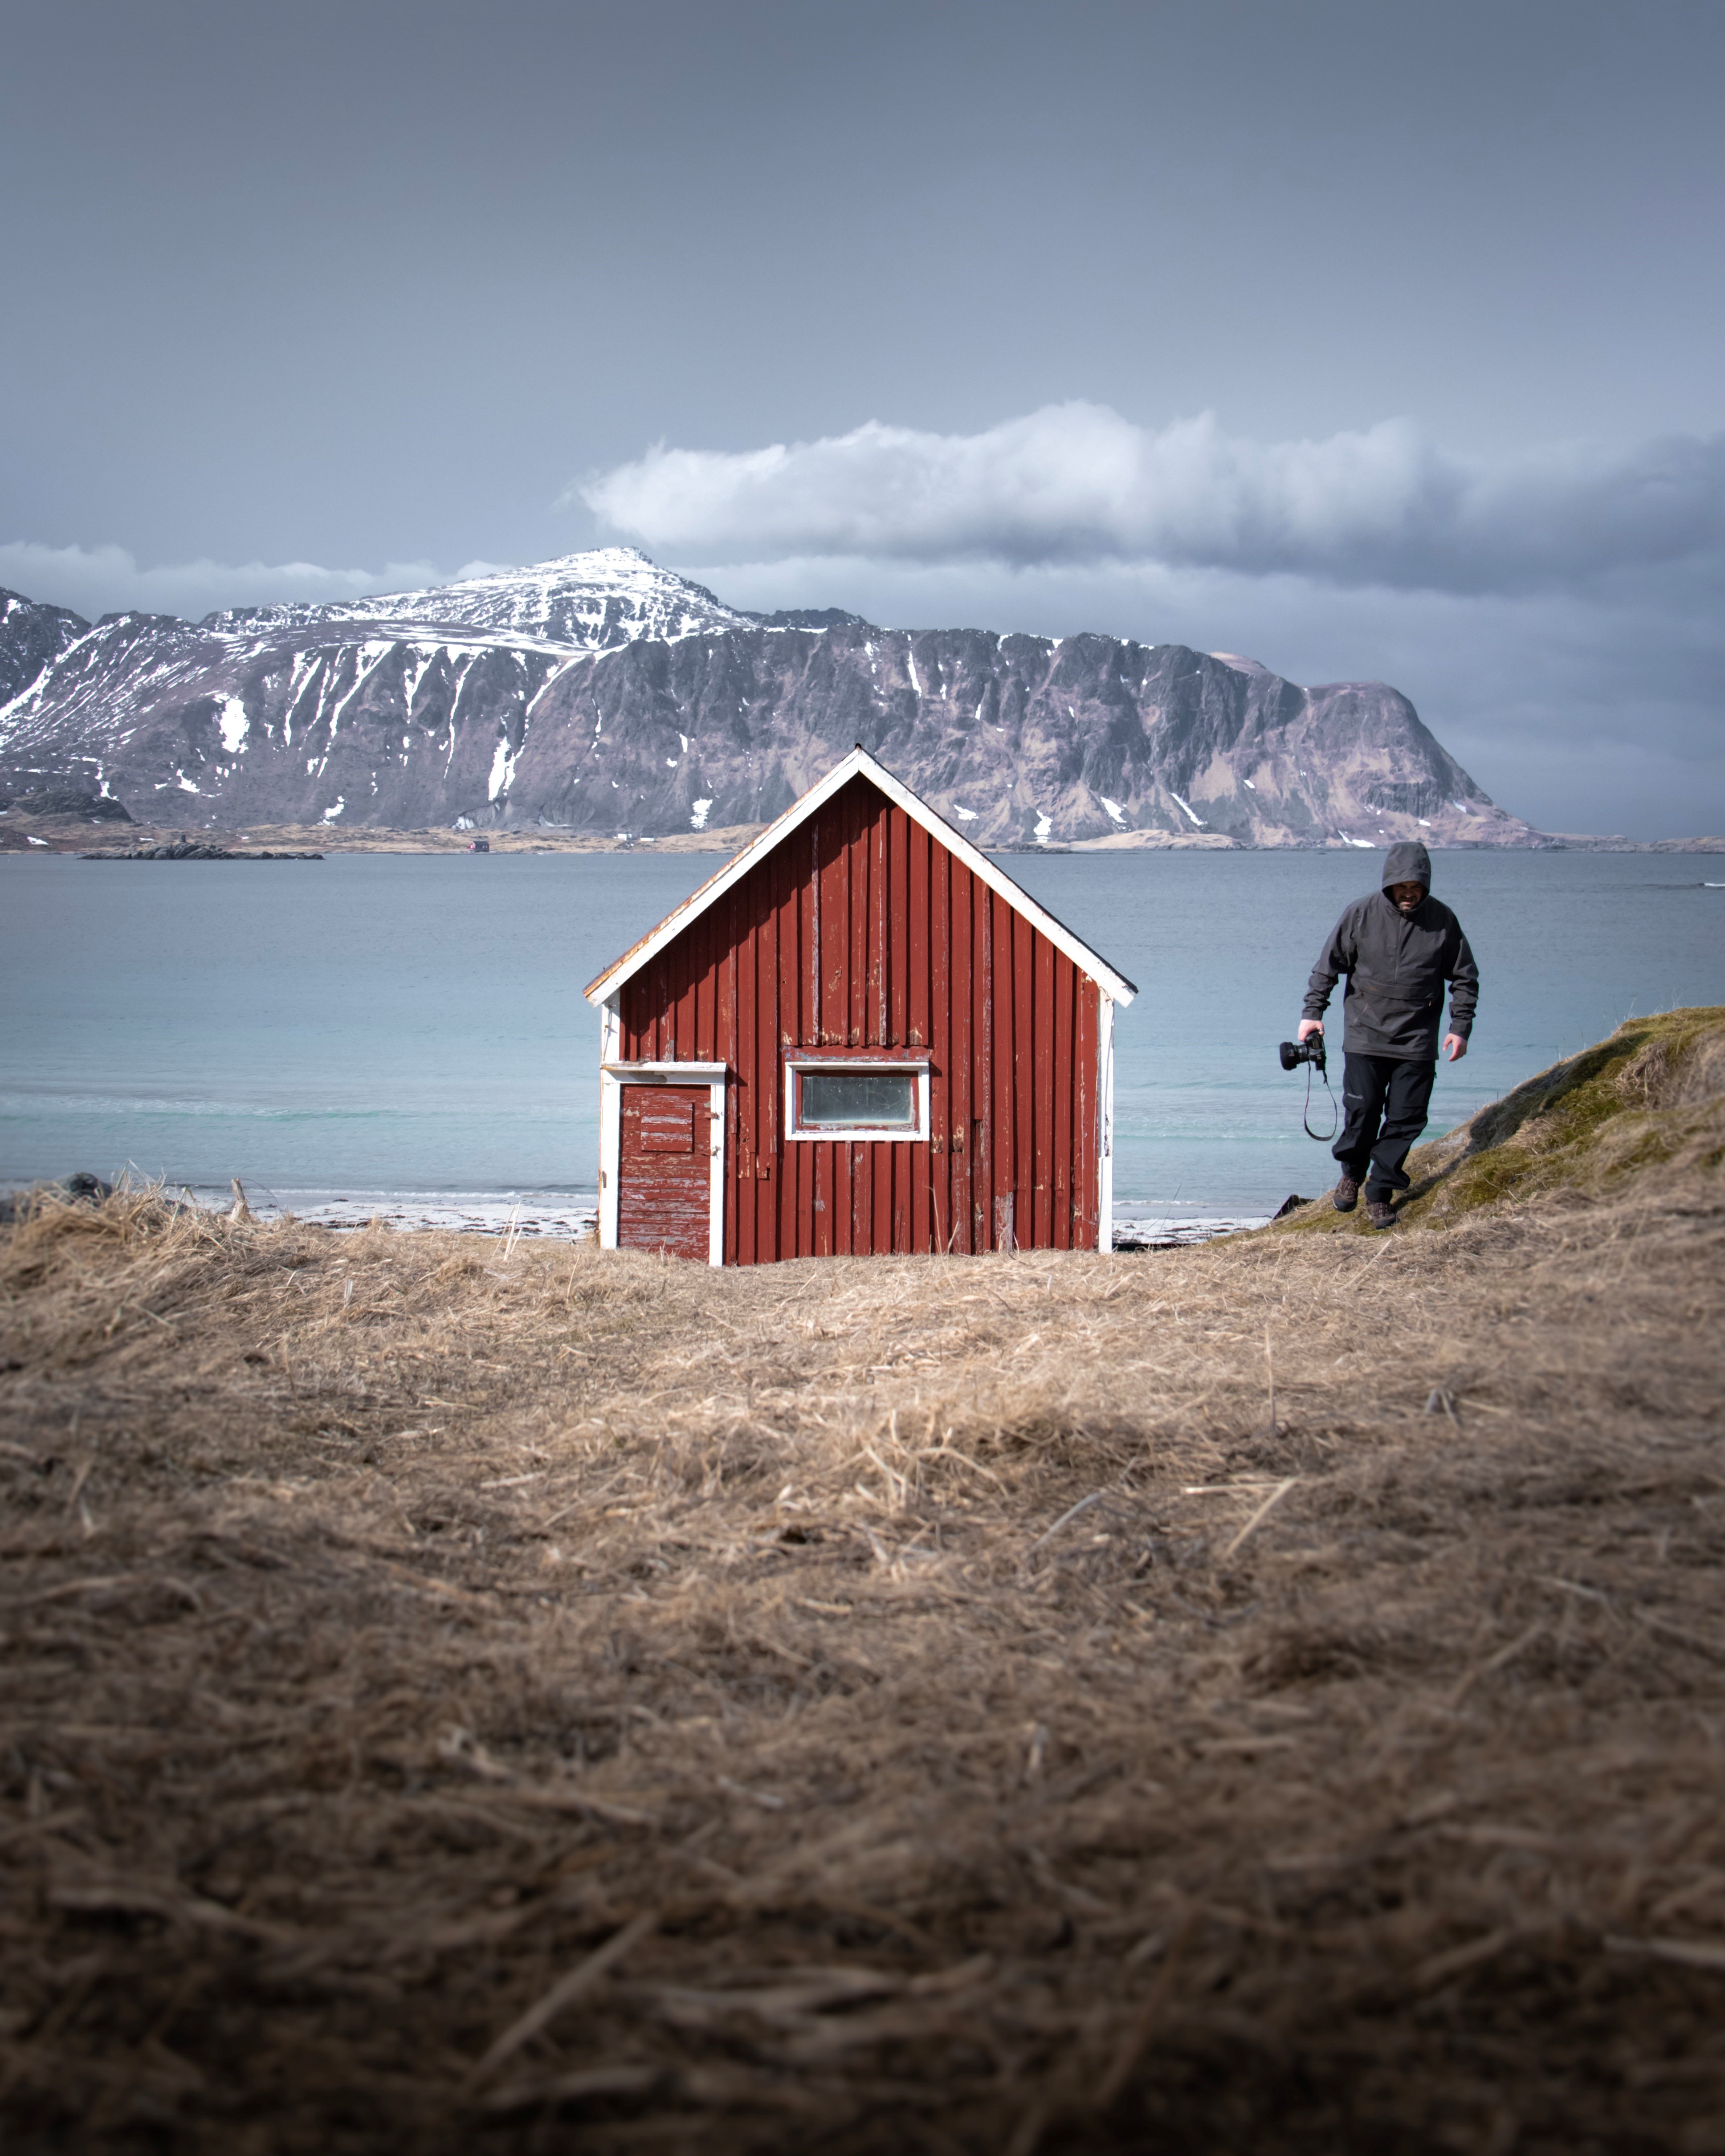 One of Lofoten Islands most iconic and photographed houses